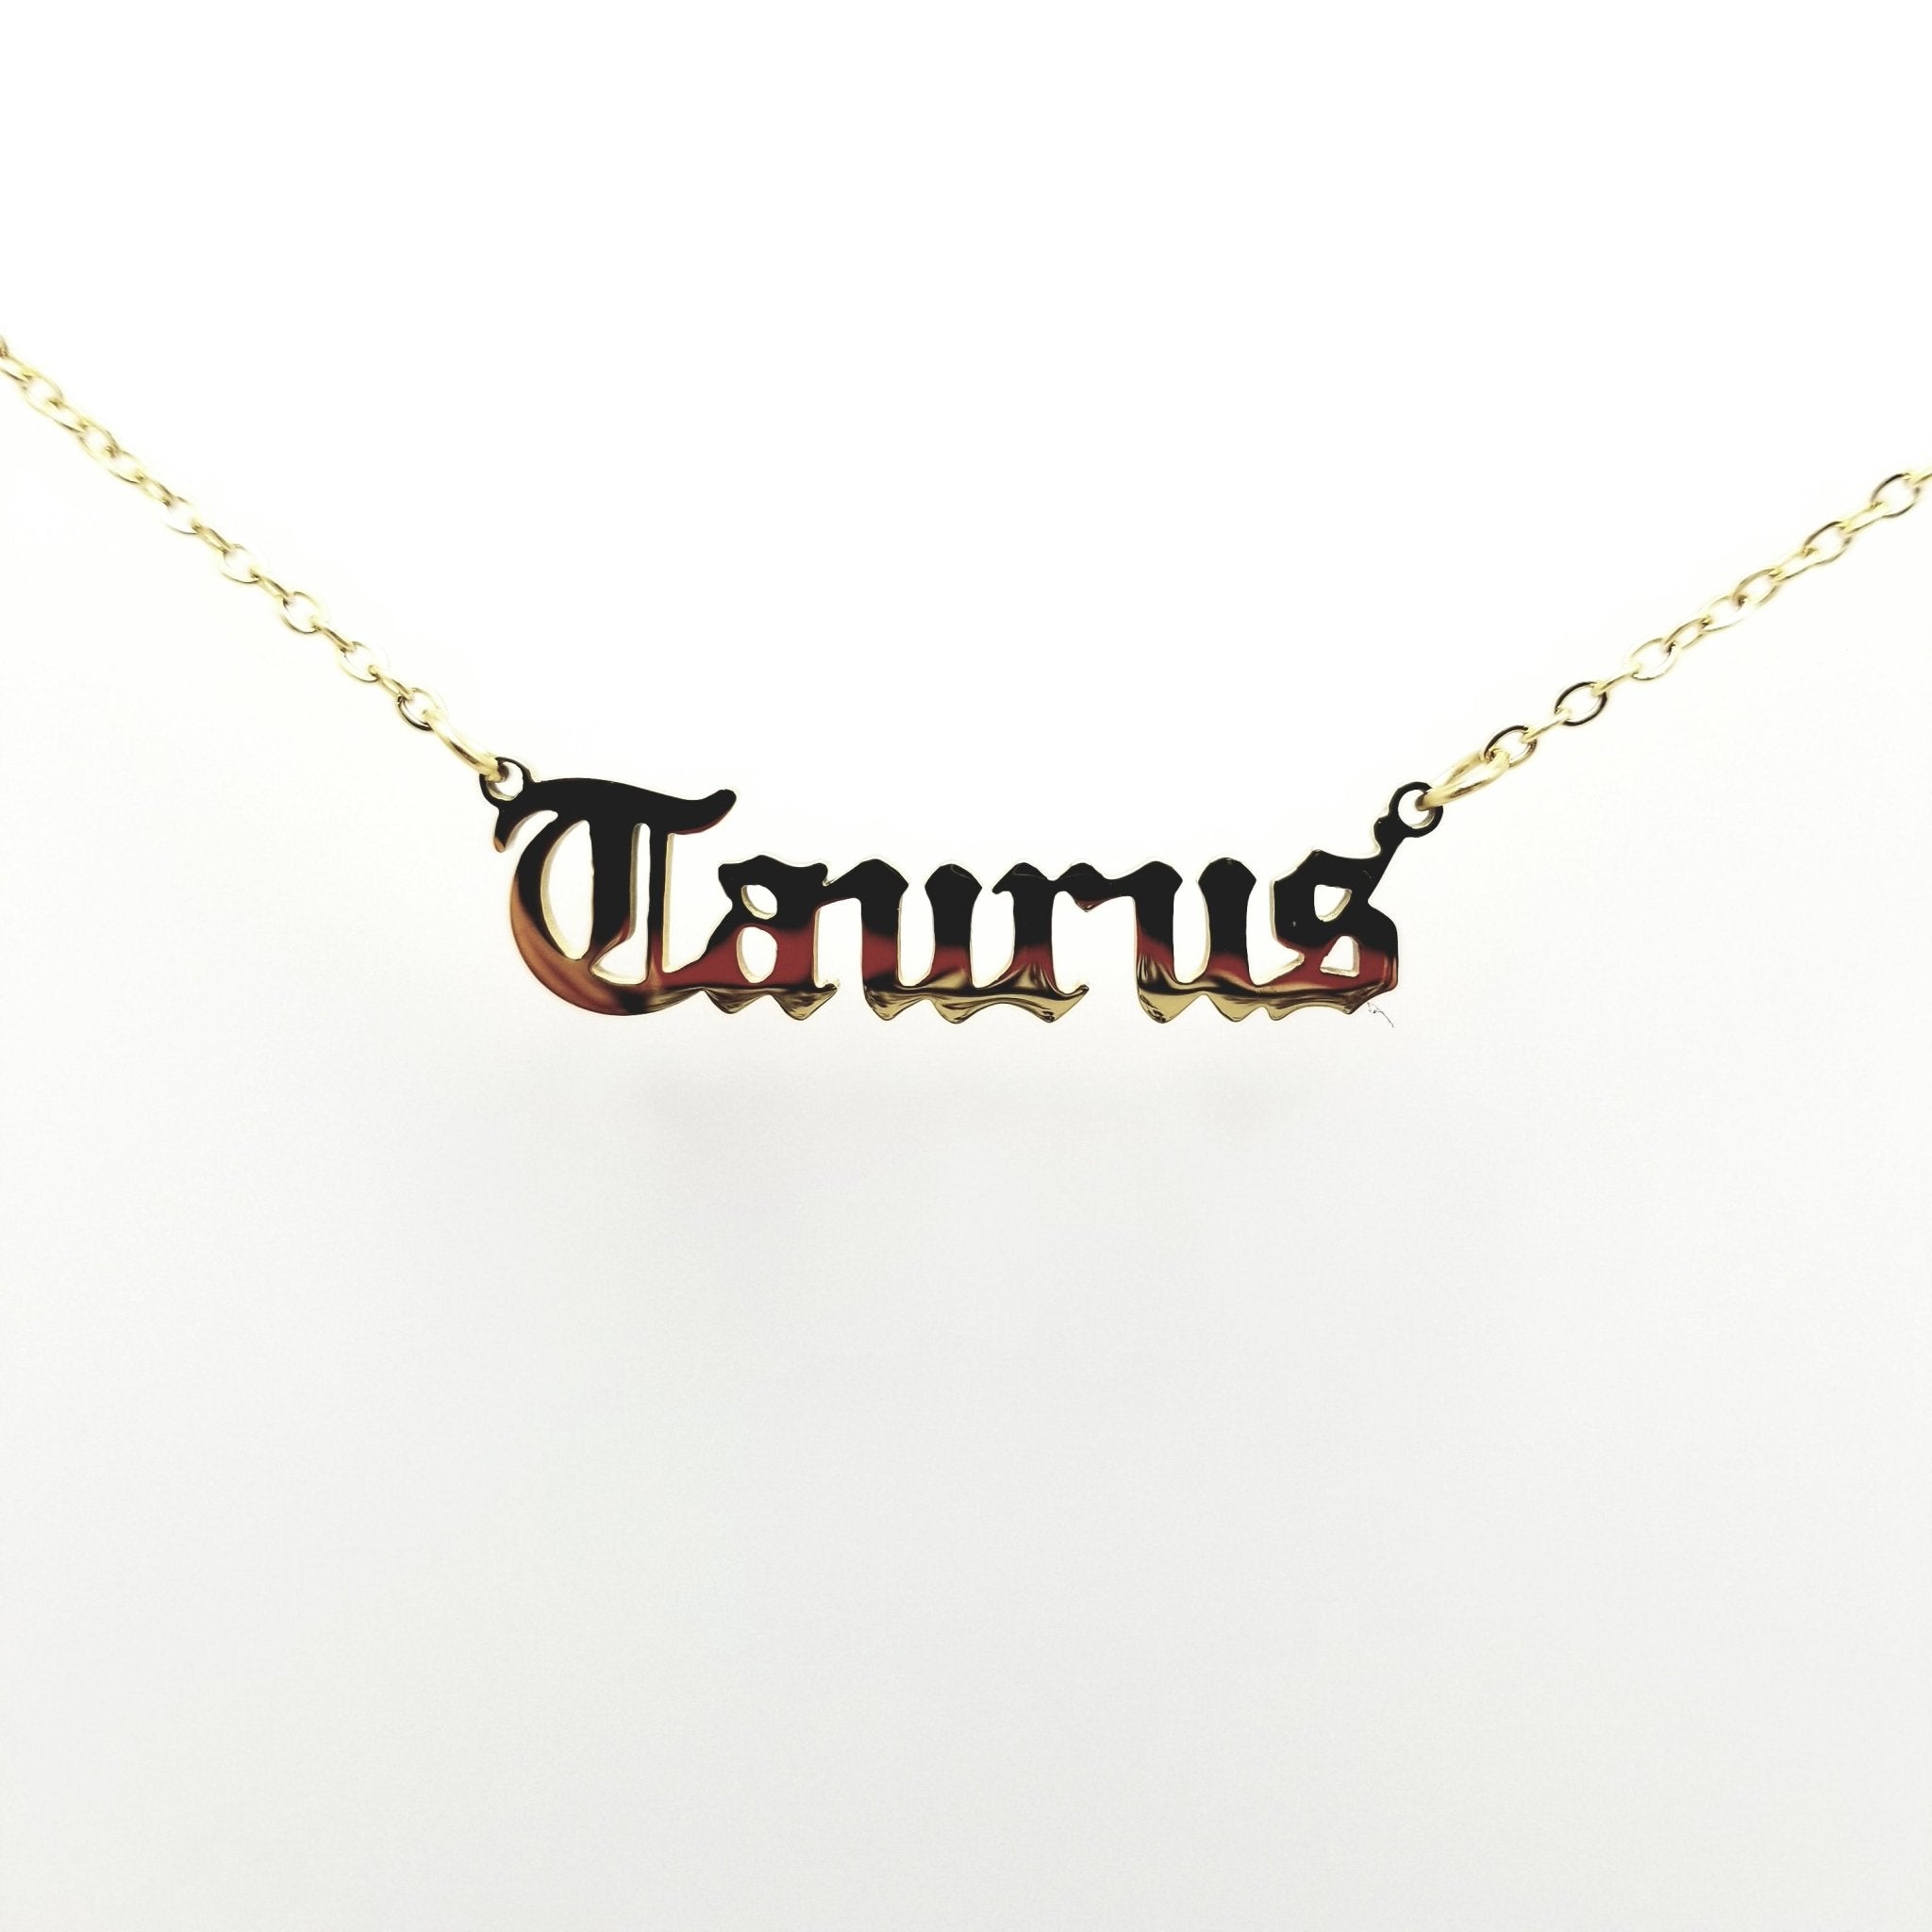 Taurus Zodiac Name Necklaces: 18k Gold Plated - Spiral Circle